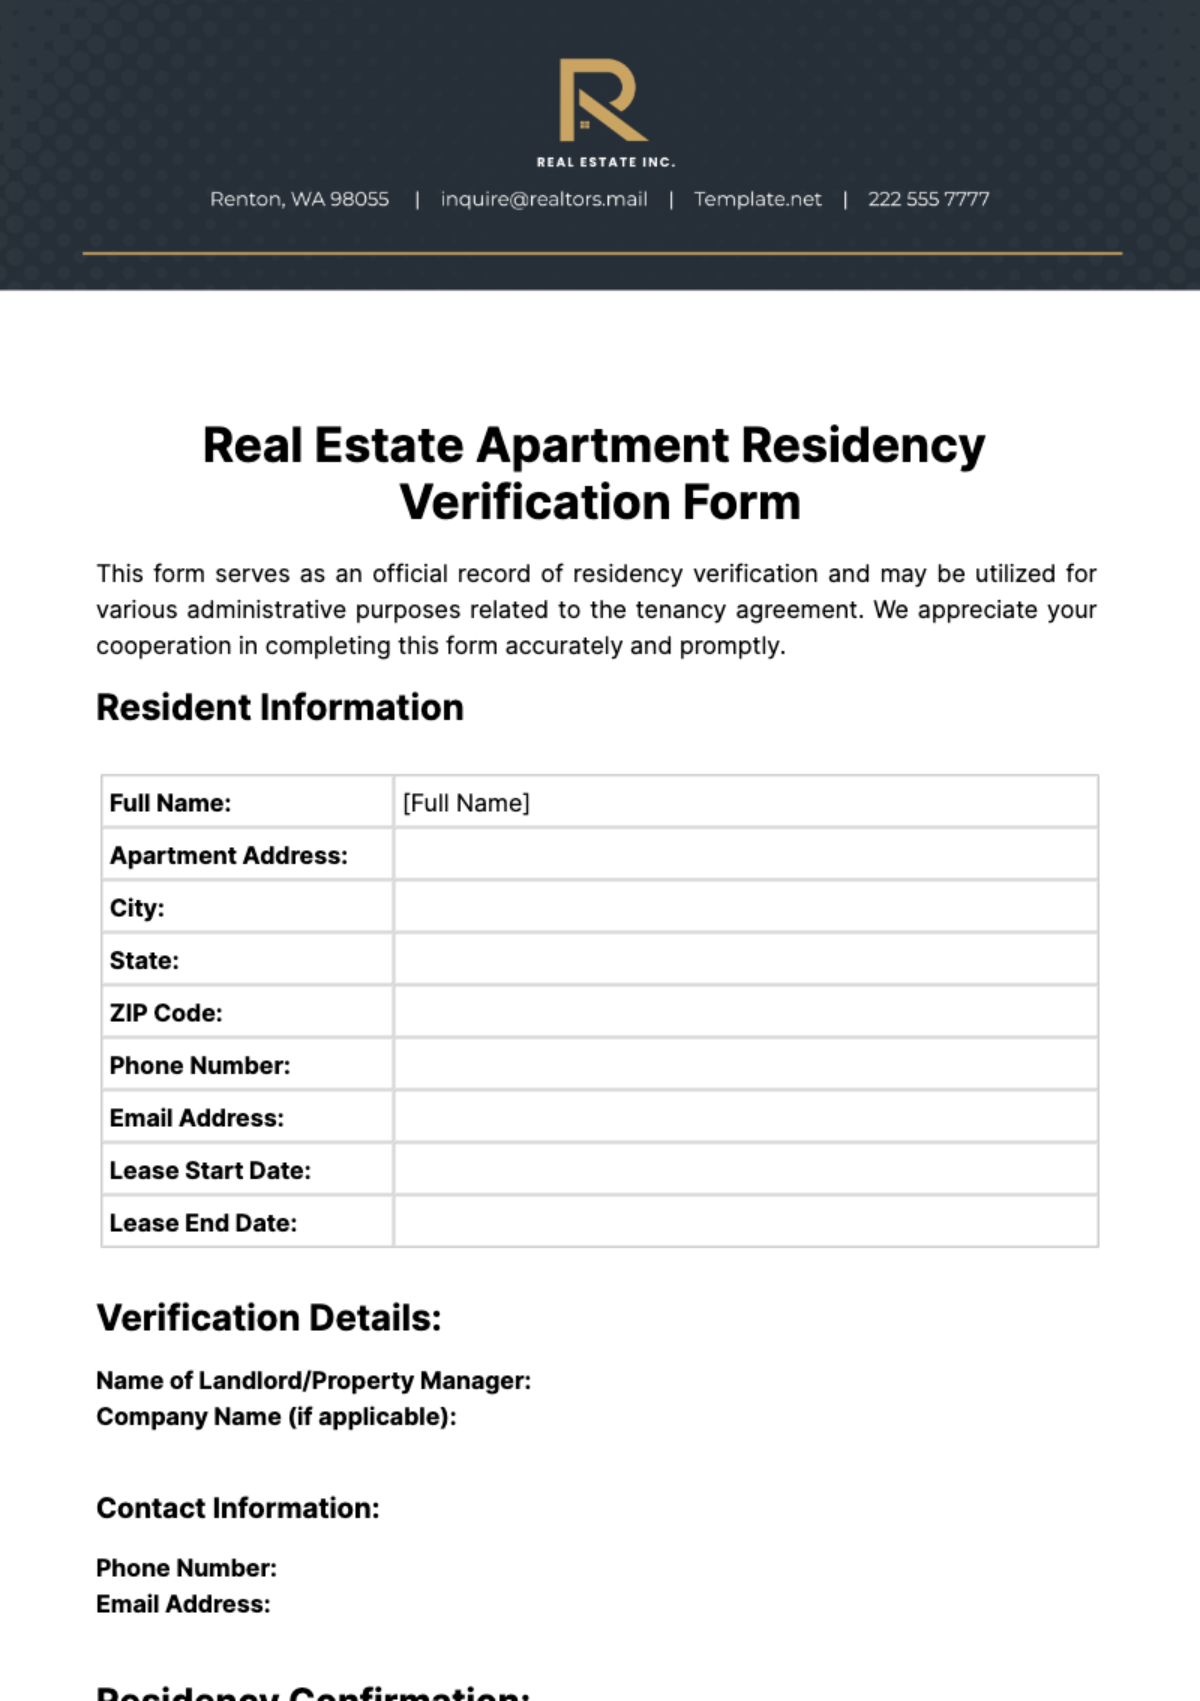 Real Estate Apartment Residency Verification Form Template